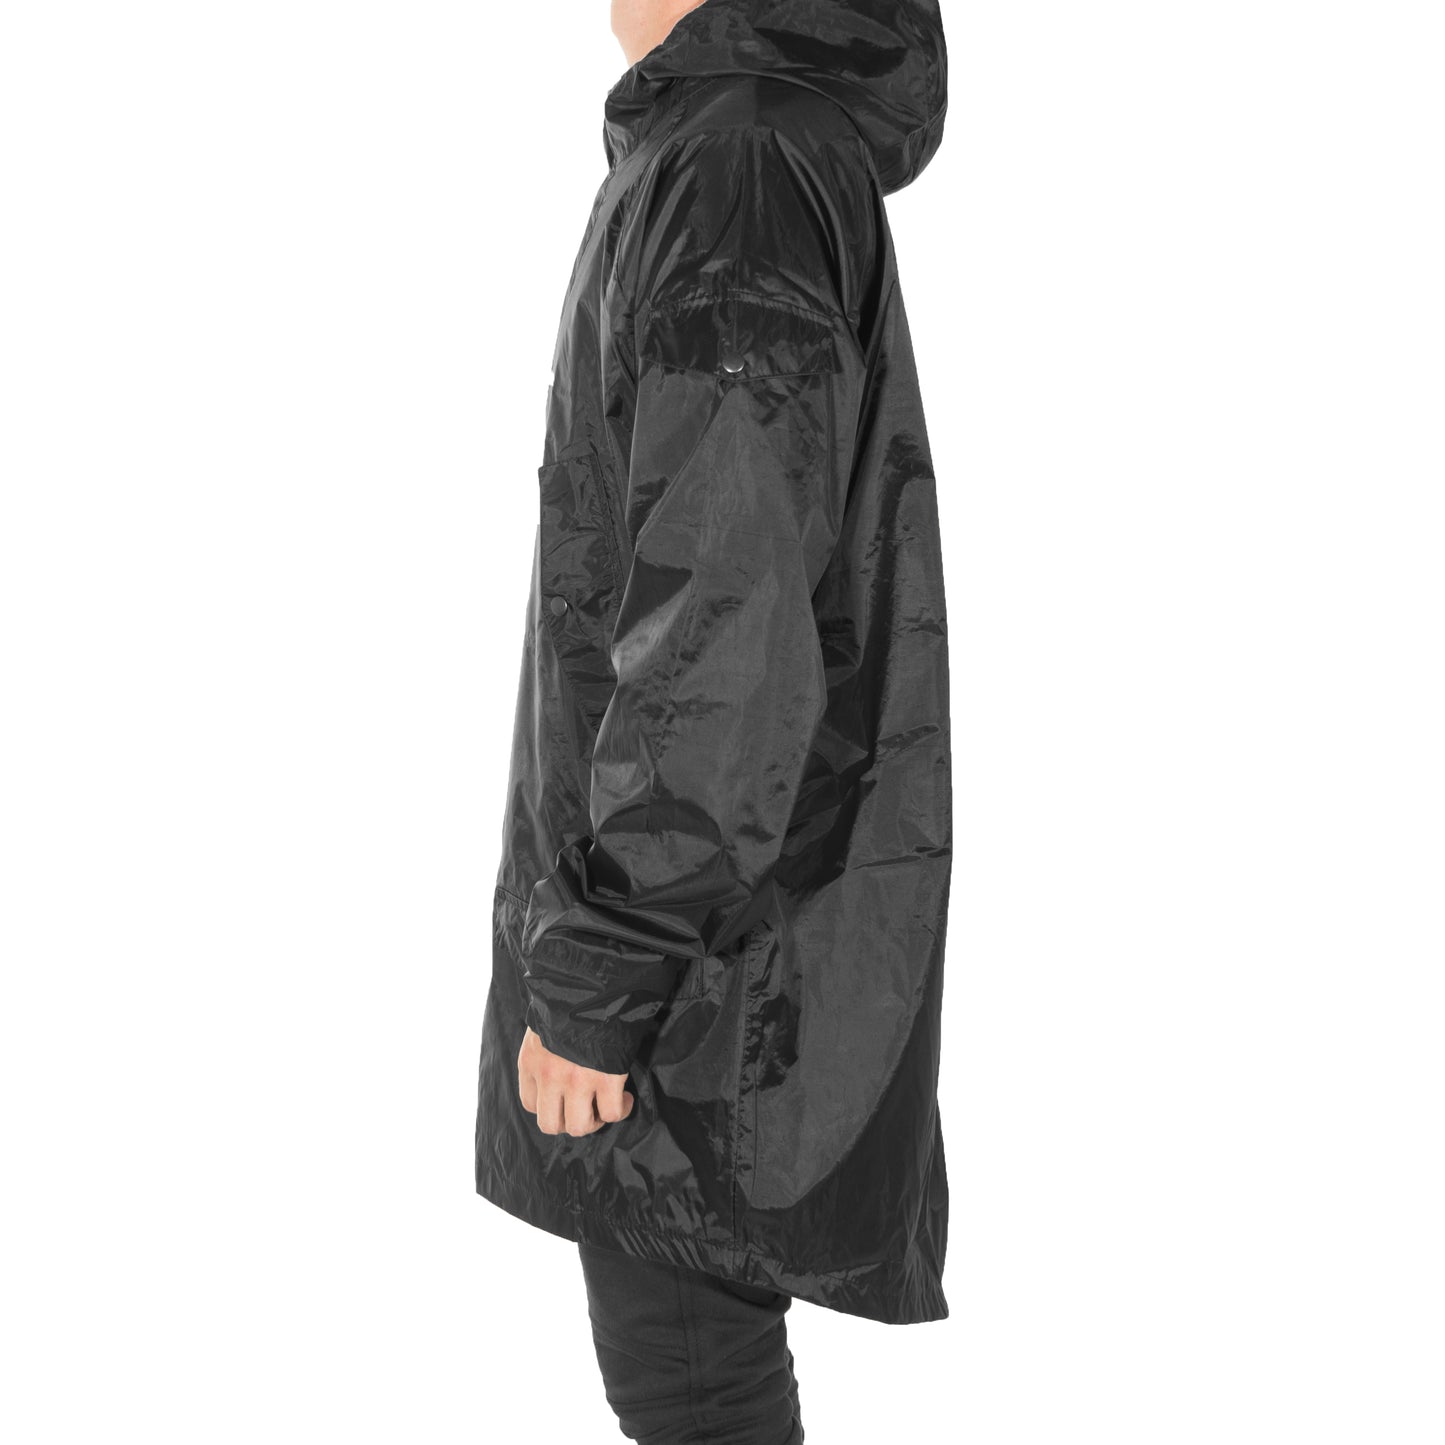 Carcasa impermeable Scoop: Negro